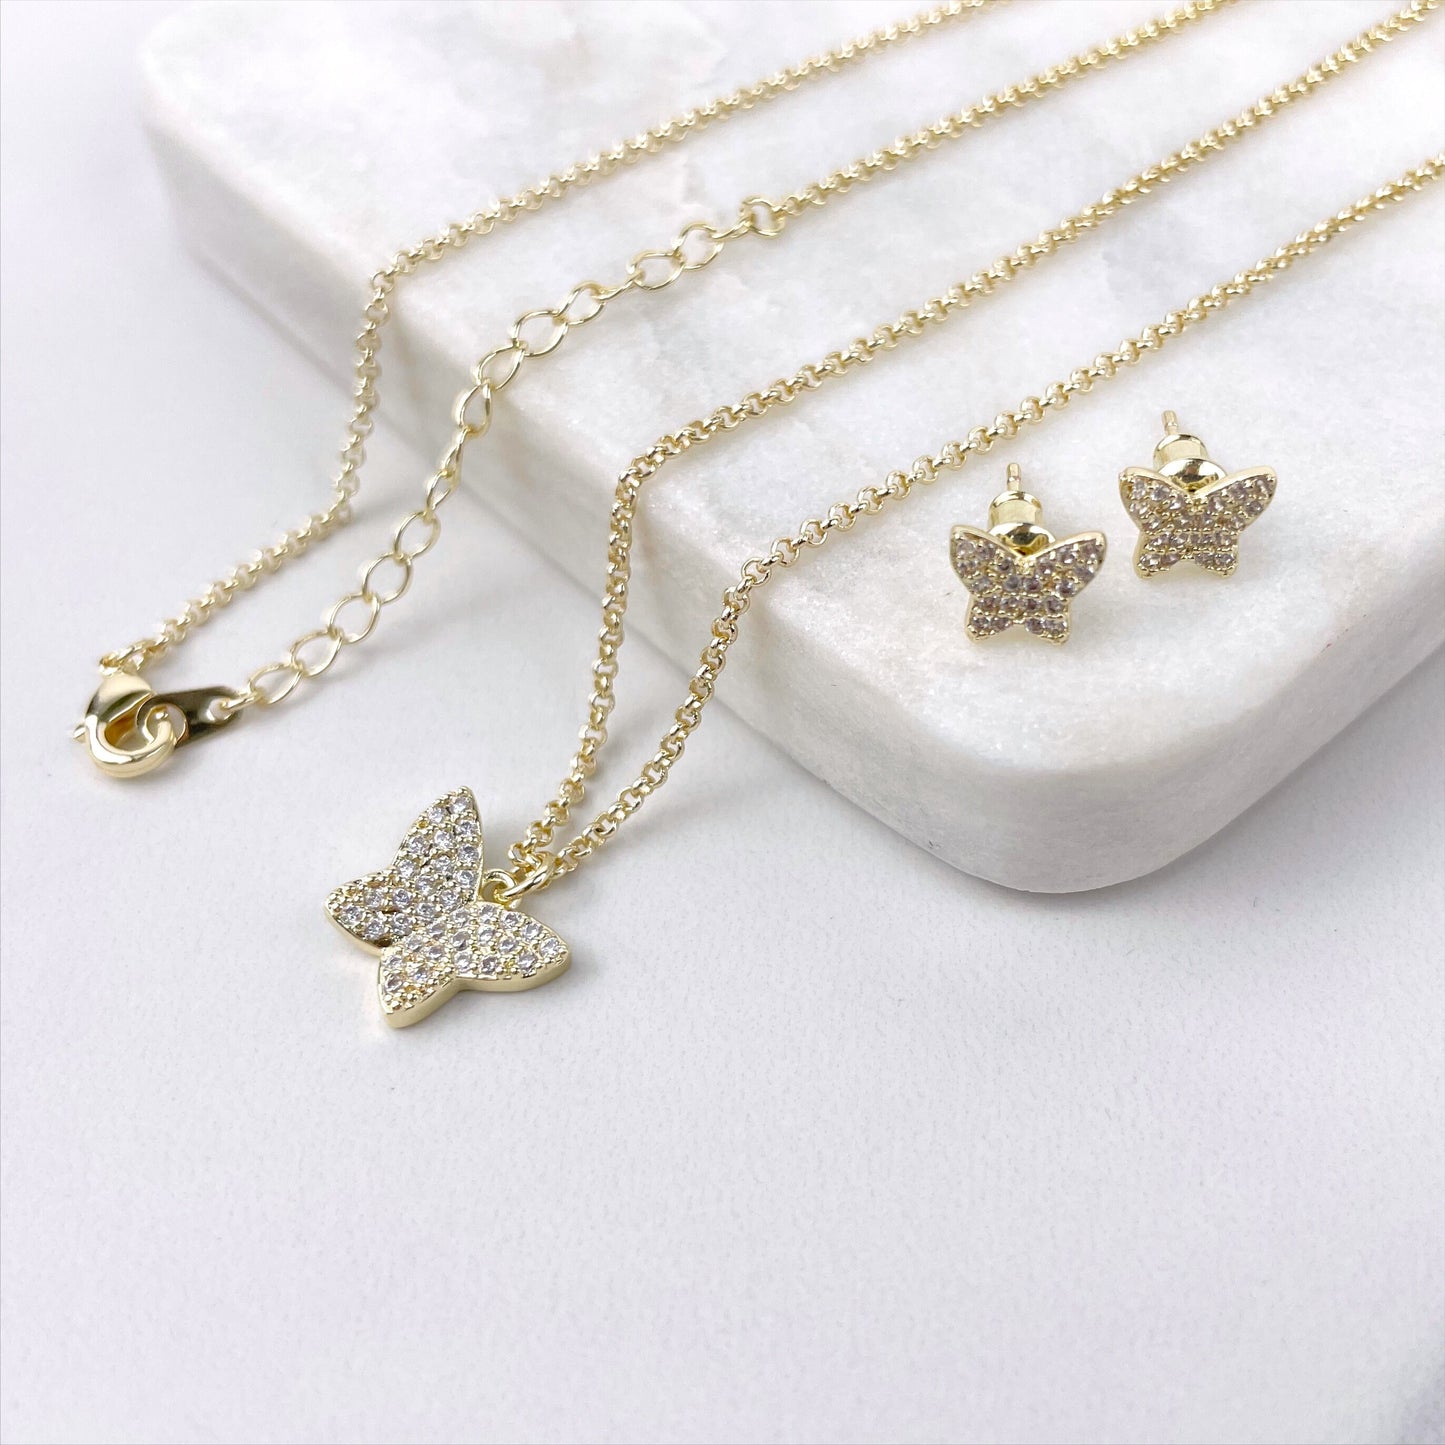 18k Gold Filled 1.6mm Cable Chain Necklace with Cubic Zirconia Petite Butterfly Shape Pendant & Stud Earrings Set Wholesale Jewelry Supplies